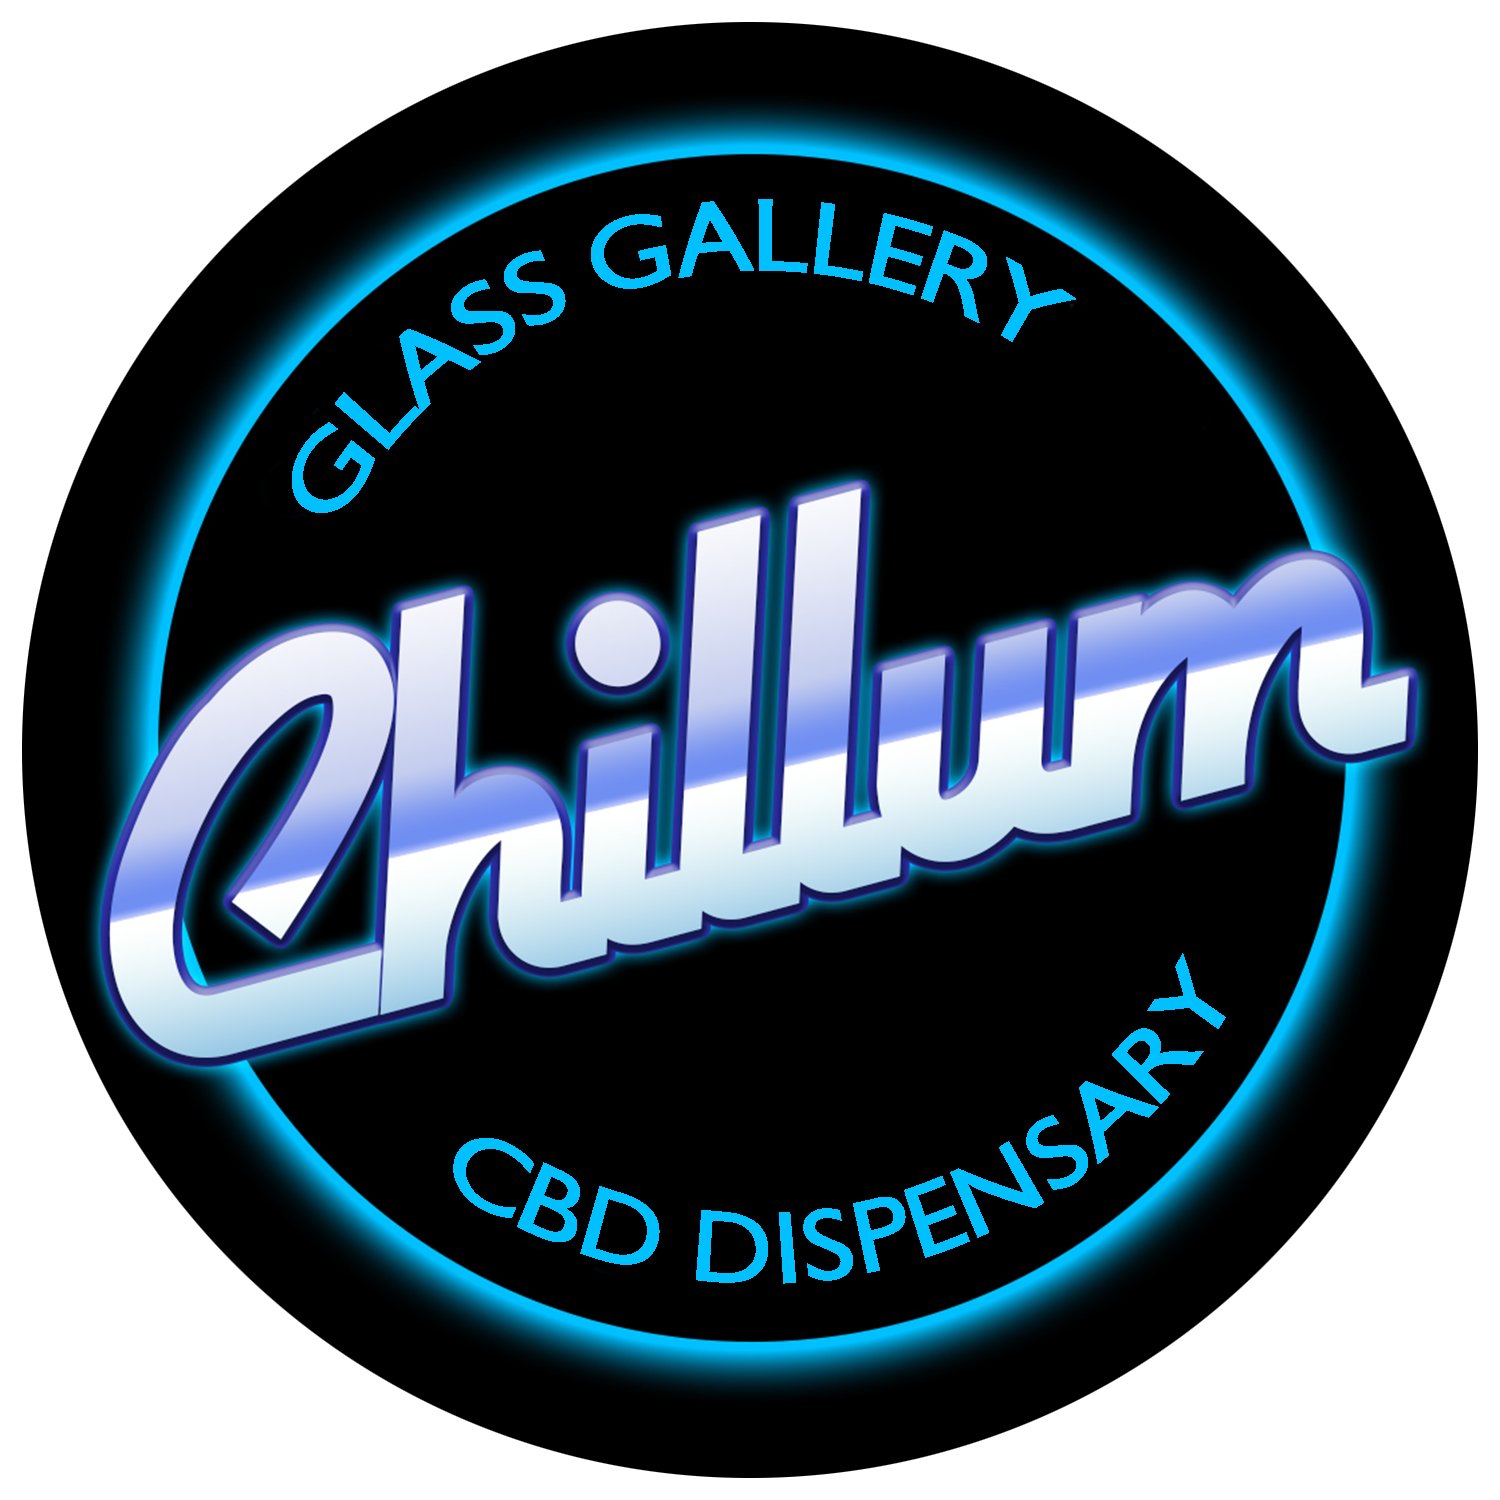 Hi! We're a hemp dispensary and glass gallery located in Historic Ybor City. Check out our online store for shipping to most states in the US!